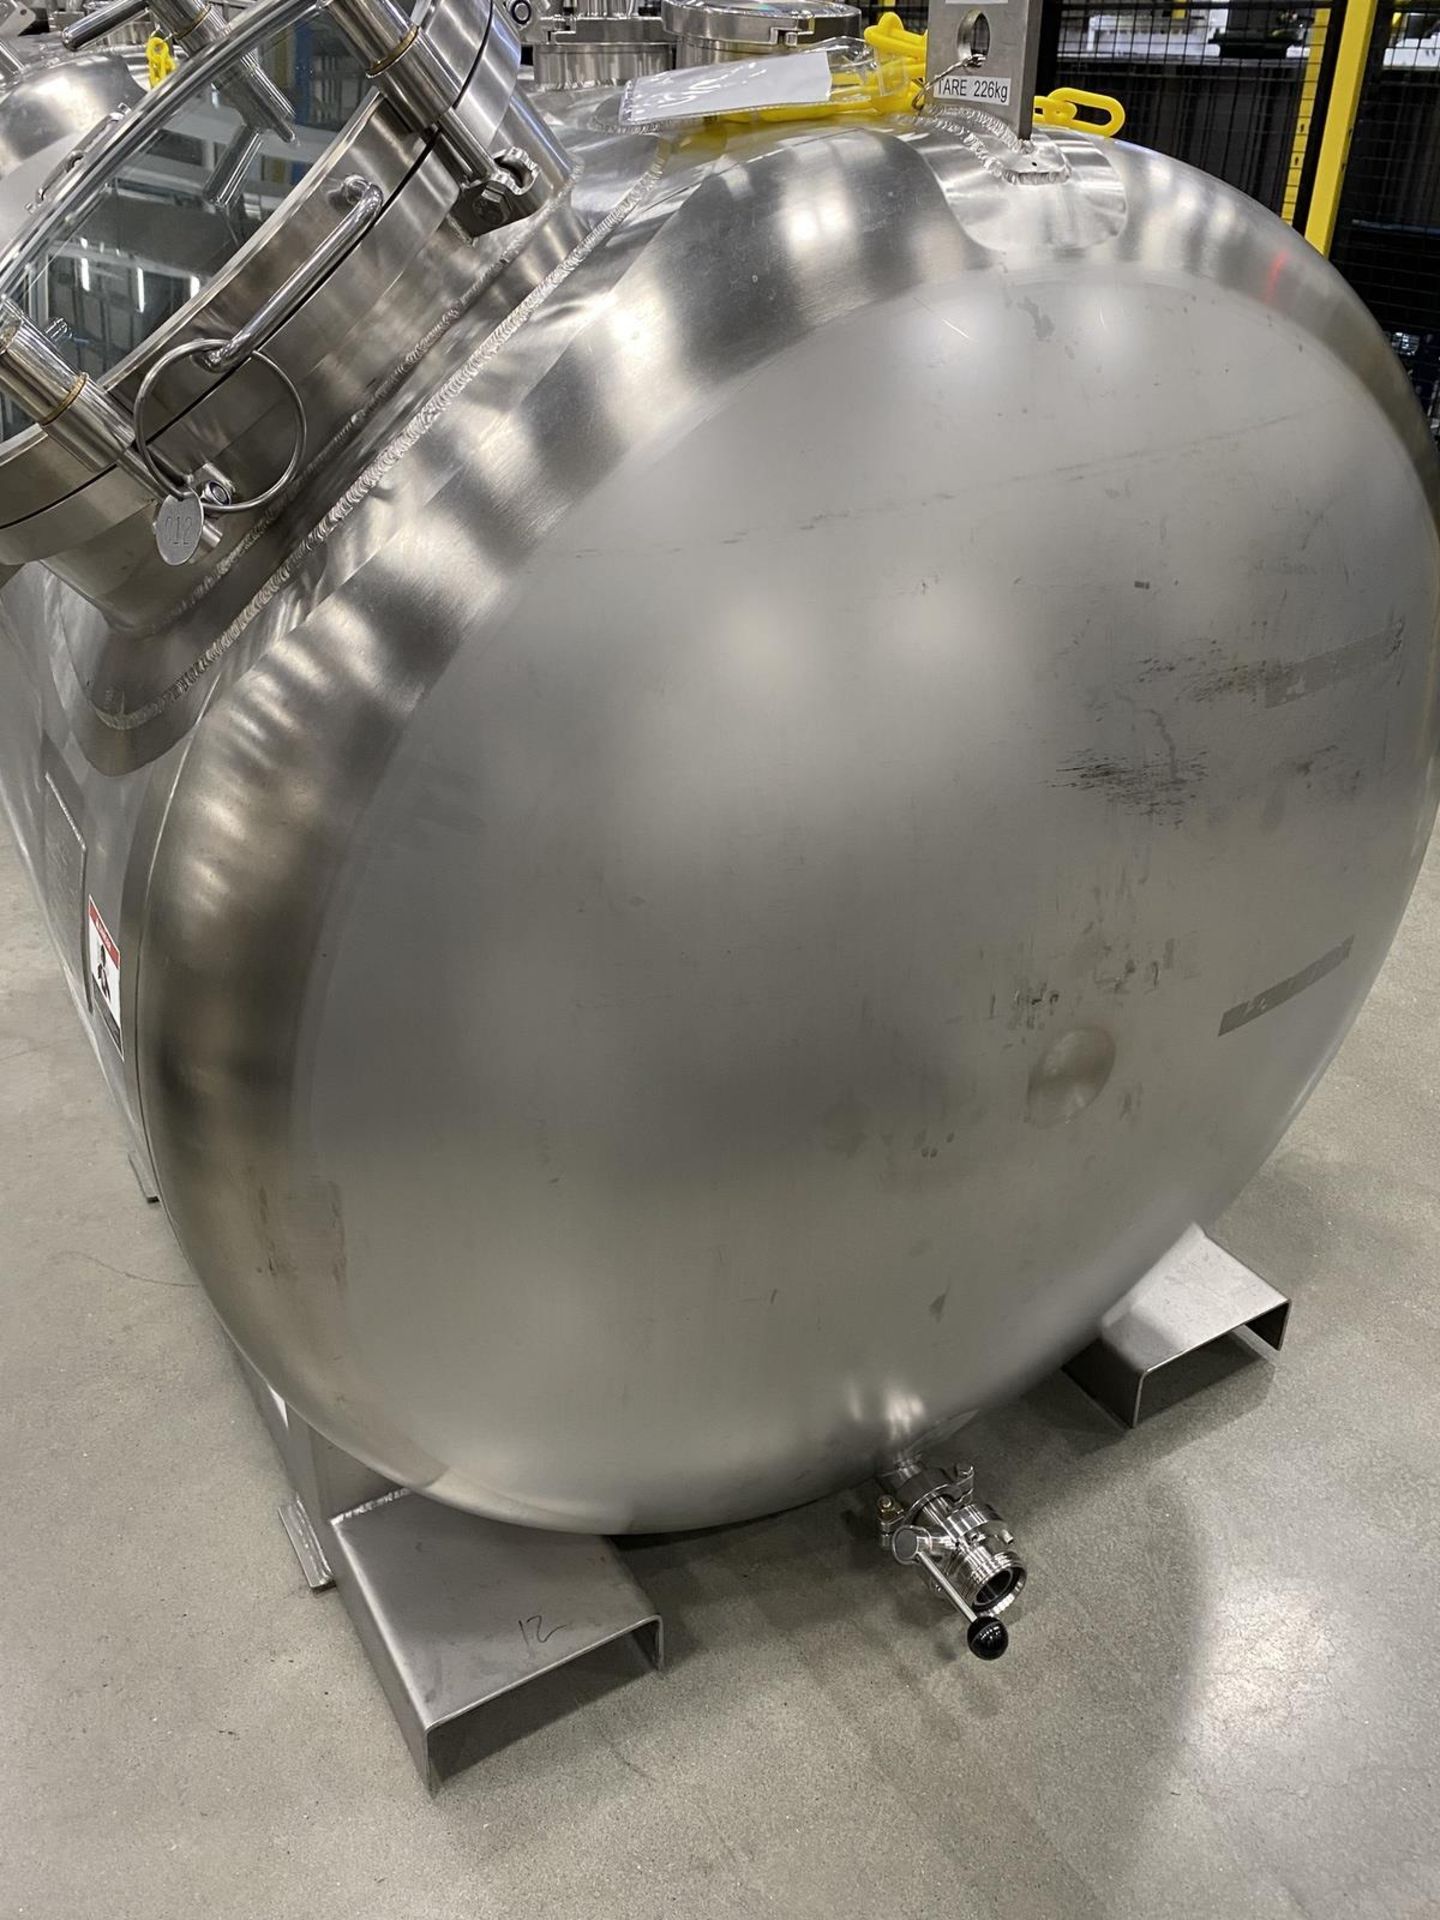 2019 A&B Process Systems 1,000 Liter Stainless Steel (316L) Skid Mounted Tank, 14. | Rig Fee: $200 - Image 4 of 5